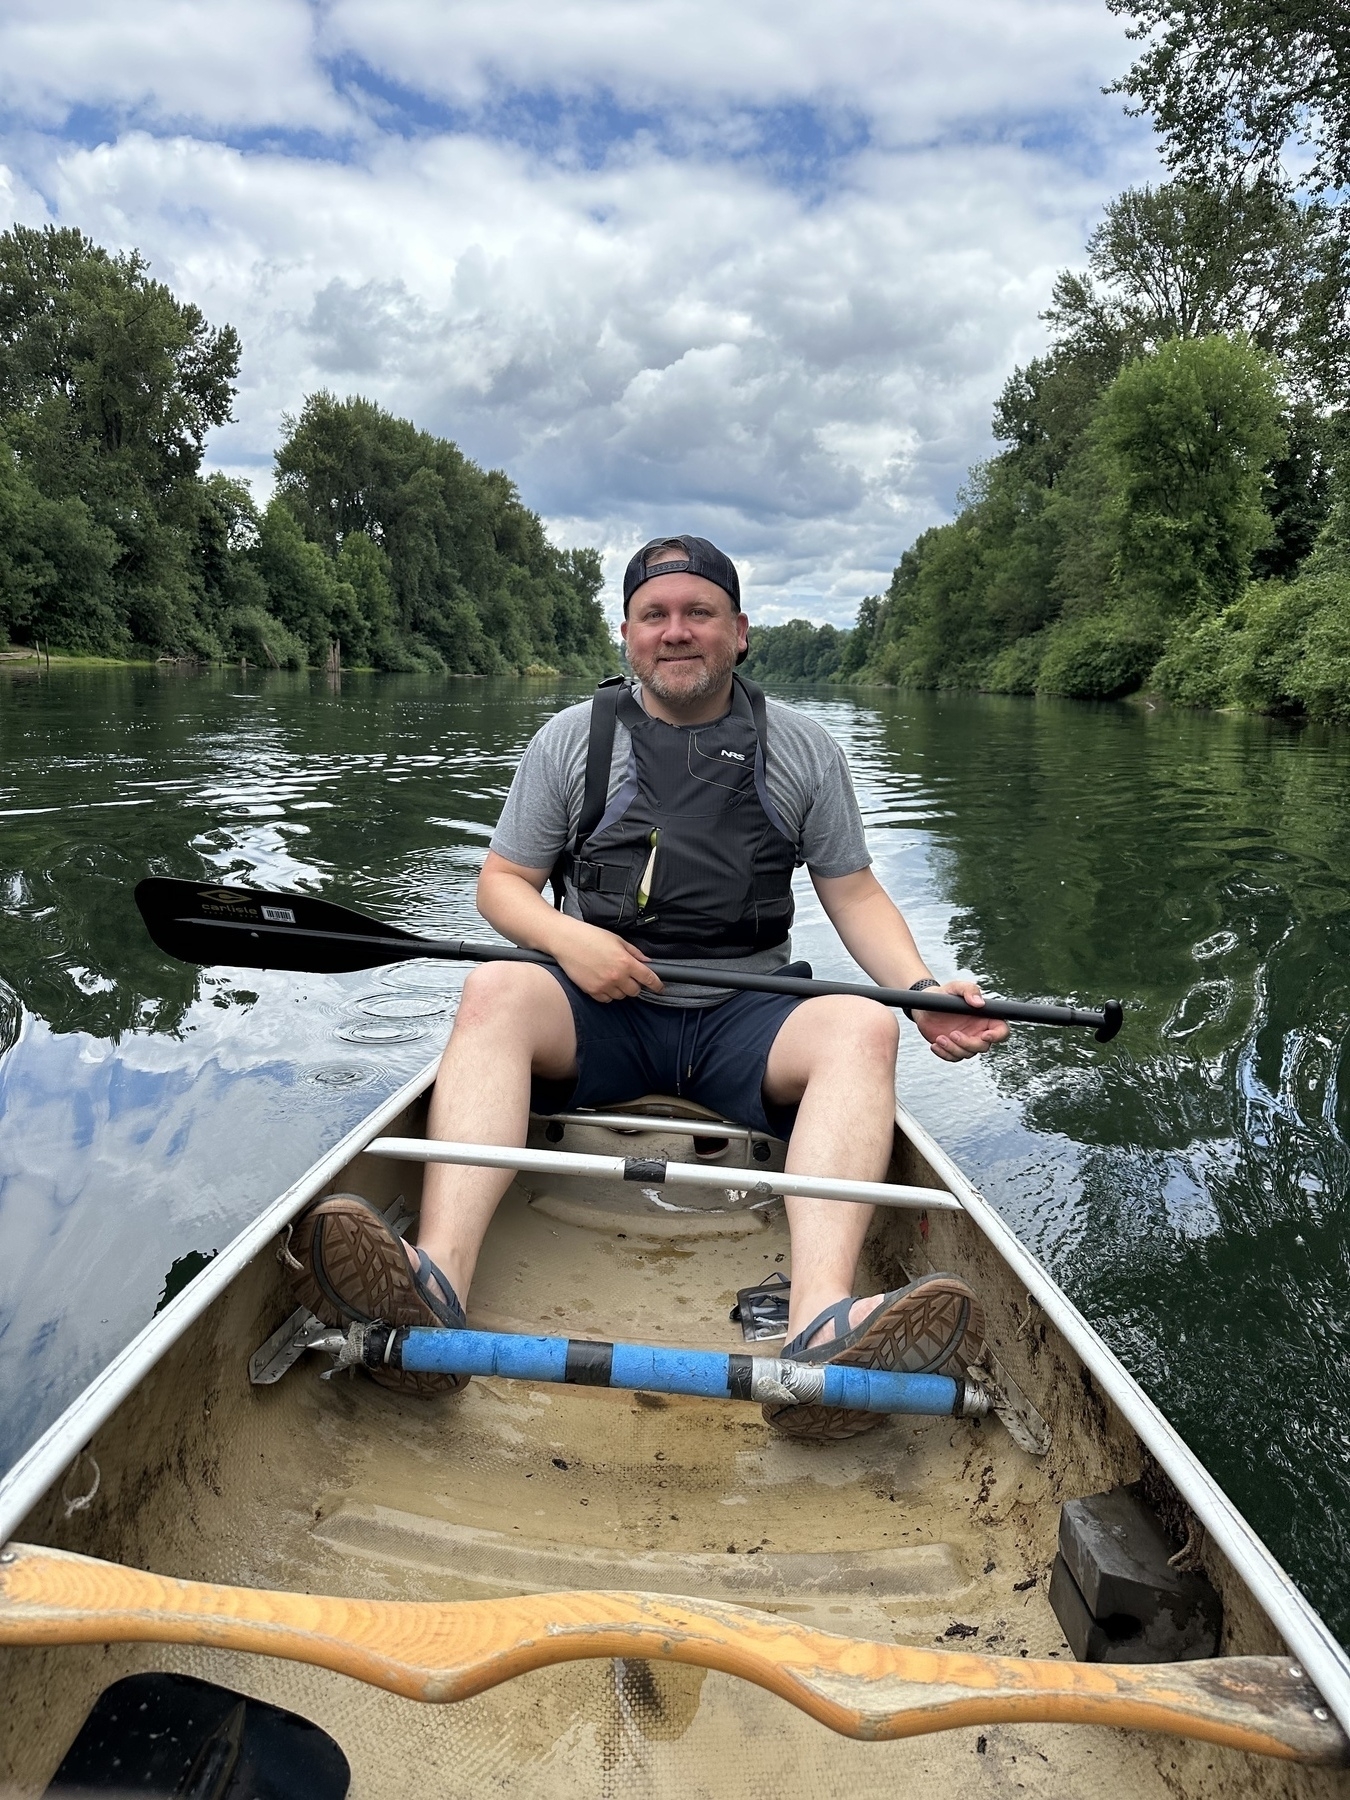 A person is sitting in a canoe paddling down a calm river surrounded by lush greenery.